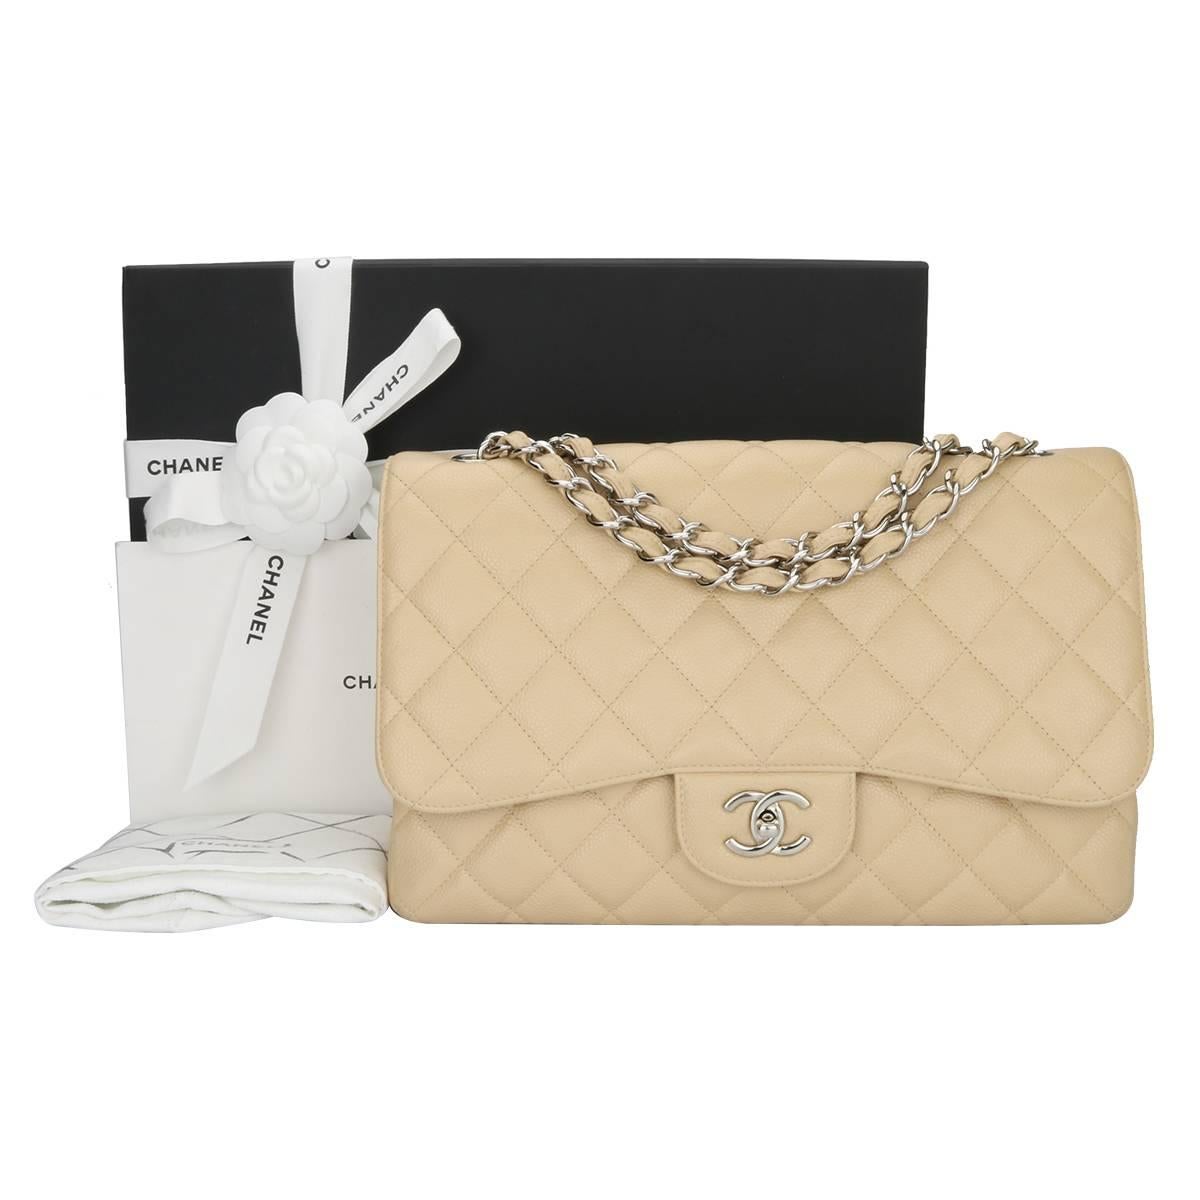 Authentic CHANEL Classic Single Flap Jumbo Beige Clair Caviar with Silver Hardware 2009.

This stunning bag is in mint condition, the bag still holds the original shape and the hardware is still very shiny.

Exterior Condition: Mint condition, tiny